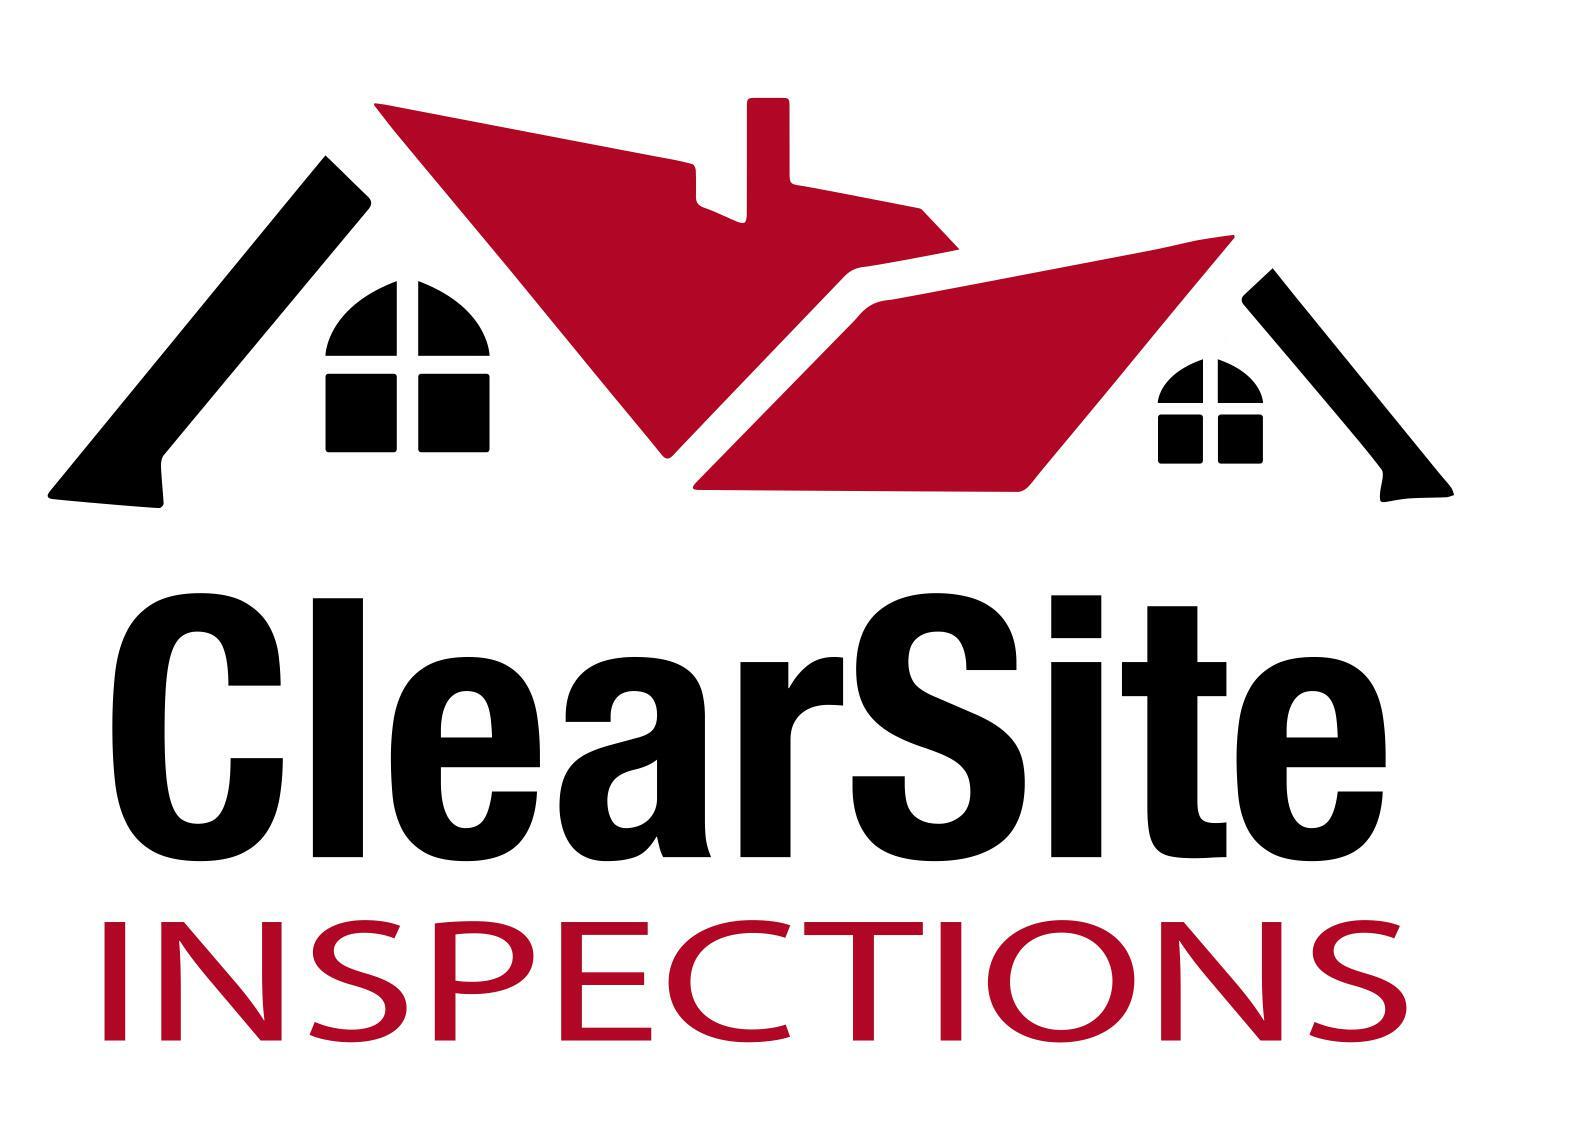 ClearSite Inspections (Professional Home Inspections)'s logo